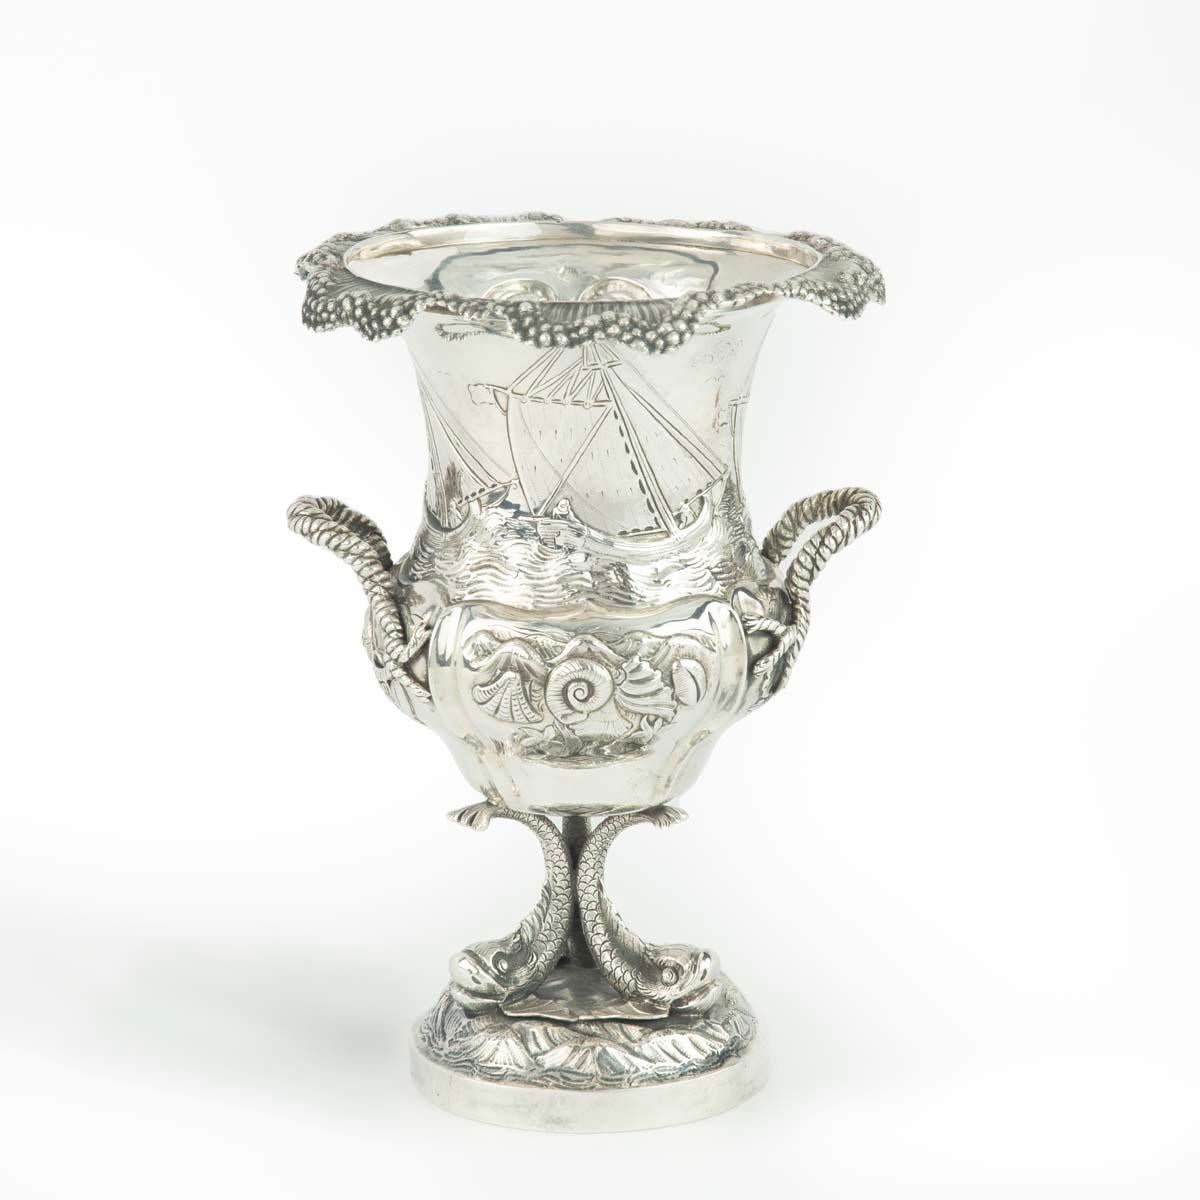 This ornate repoussé silver trophy is in the form of a handled cup with an everted rim and tripod dolphin base.  The high relief decoration comprises three gaff rigged yachts racing, above a frieze of shells against waves.  There is a C-scroll